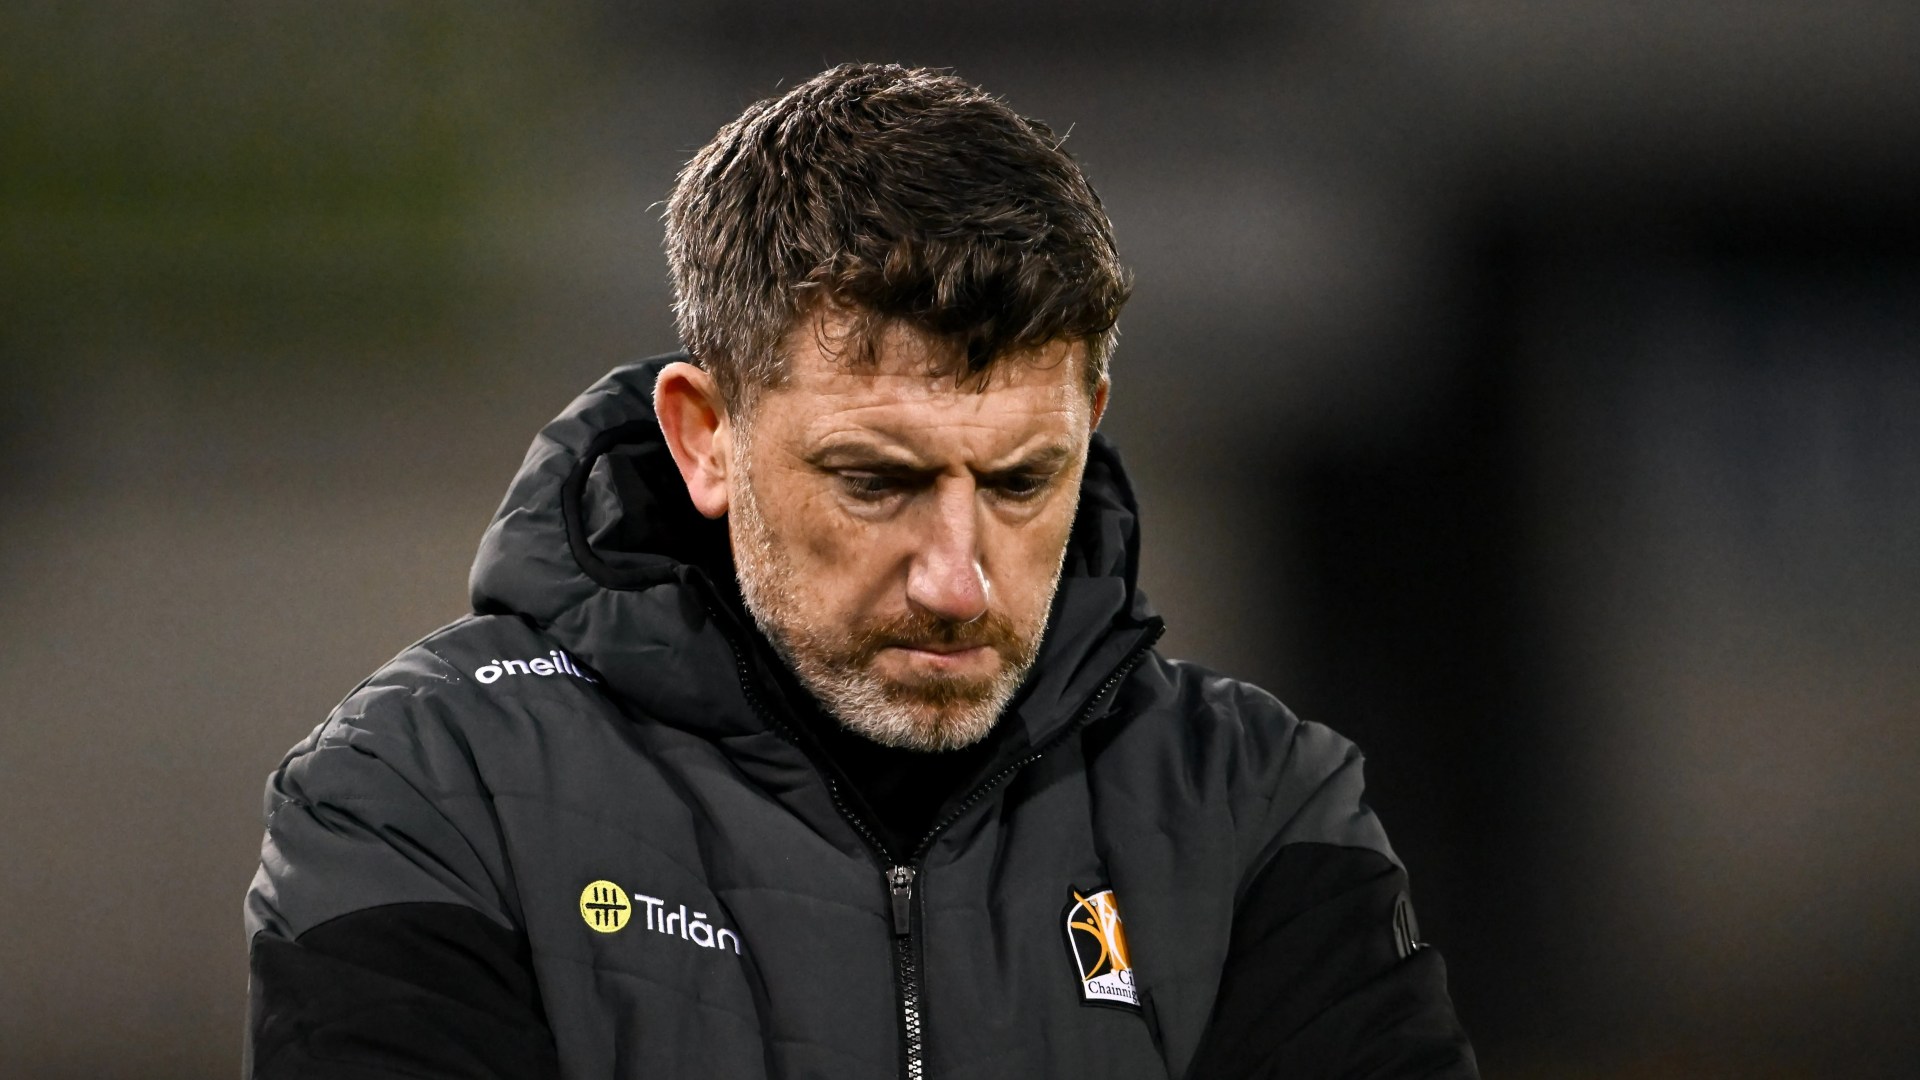 Kilkenny GAA suffer huge injury blow as All-Star receives dreaded diagnosis which will curtail season [Video]